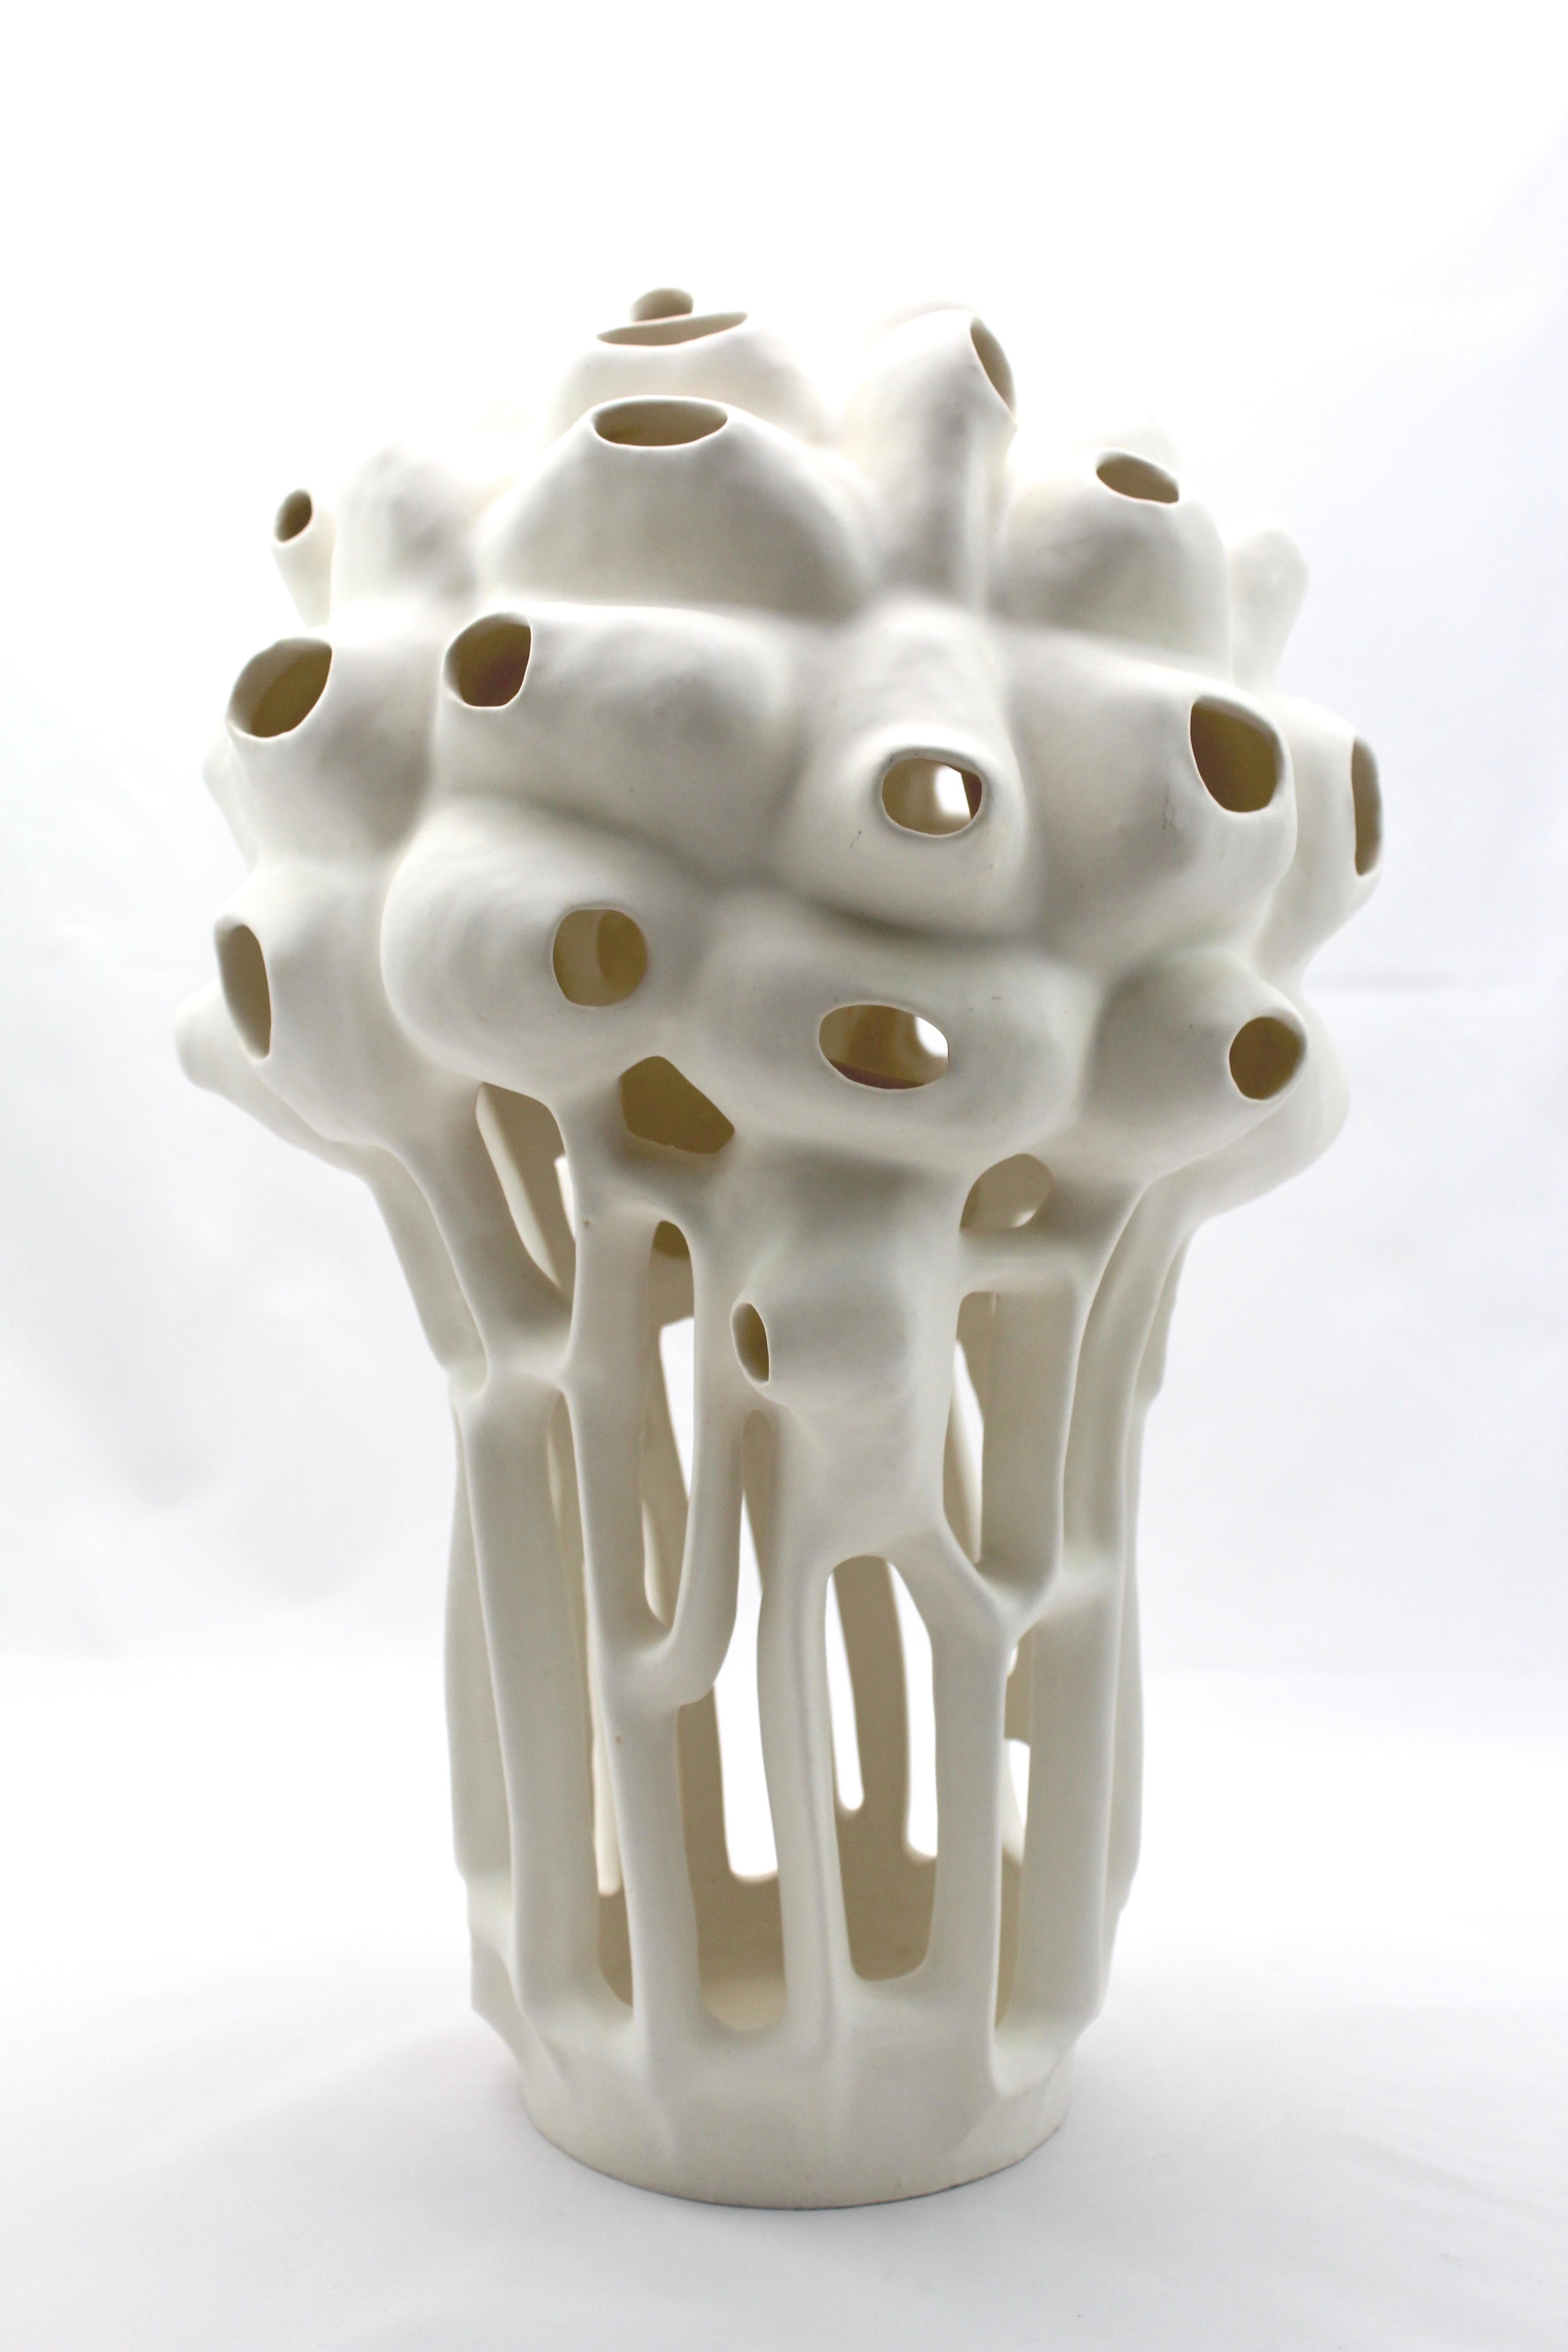 Untitled #6 - abstract geometric, organic white glazed porcelain sculpture 